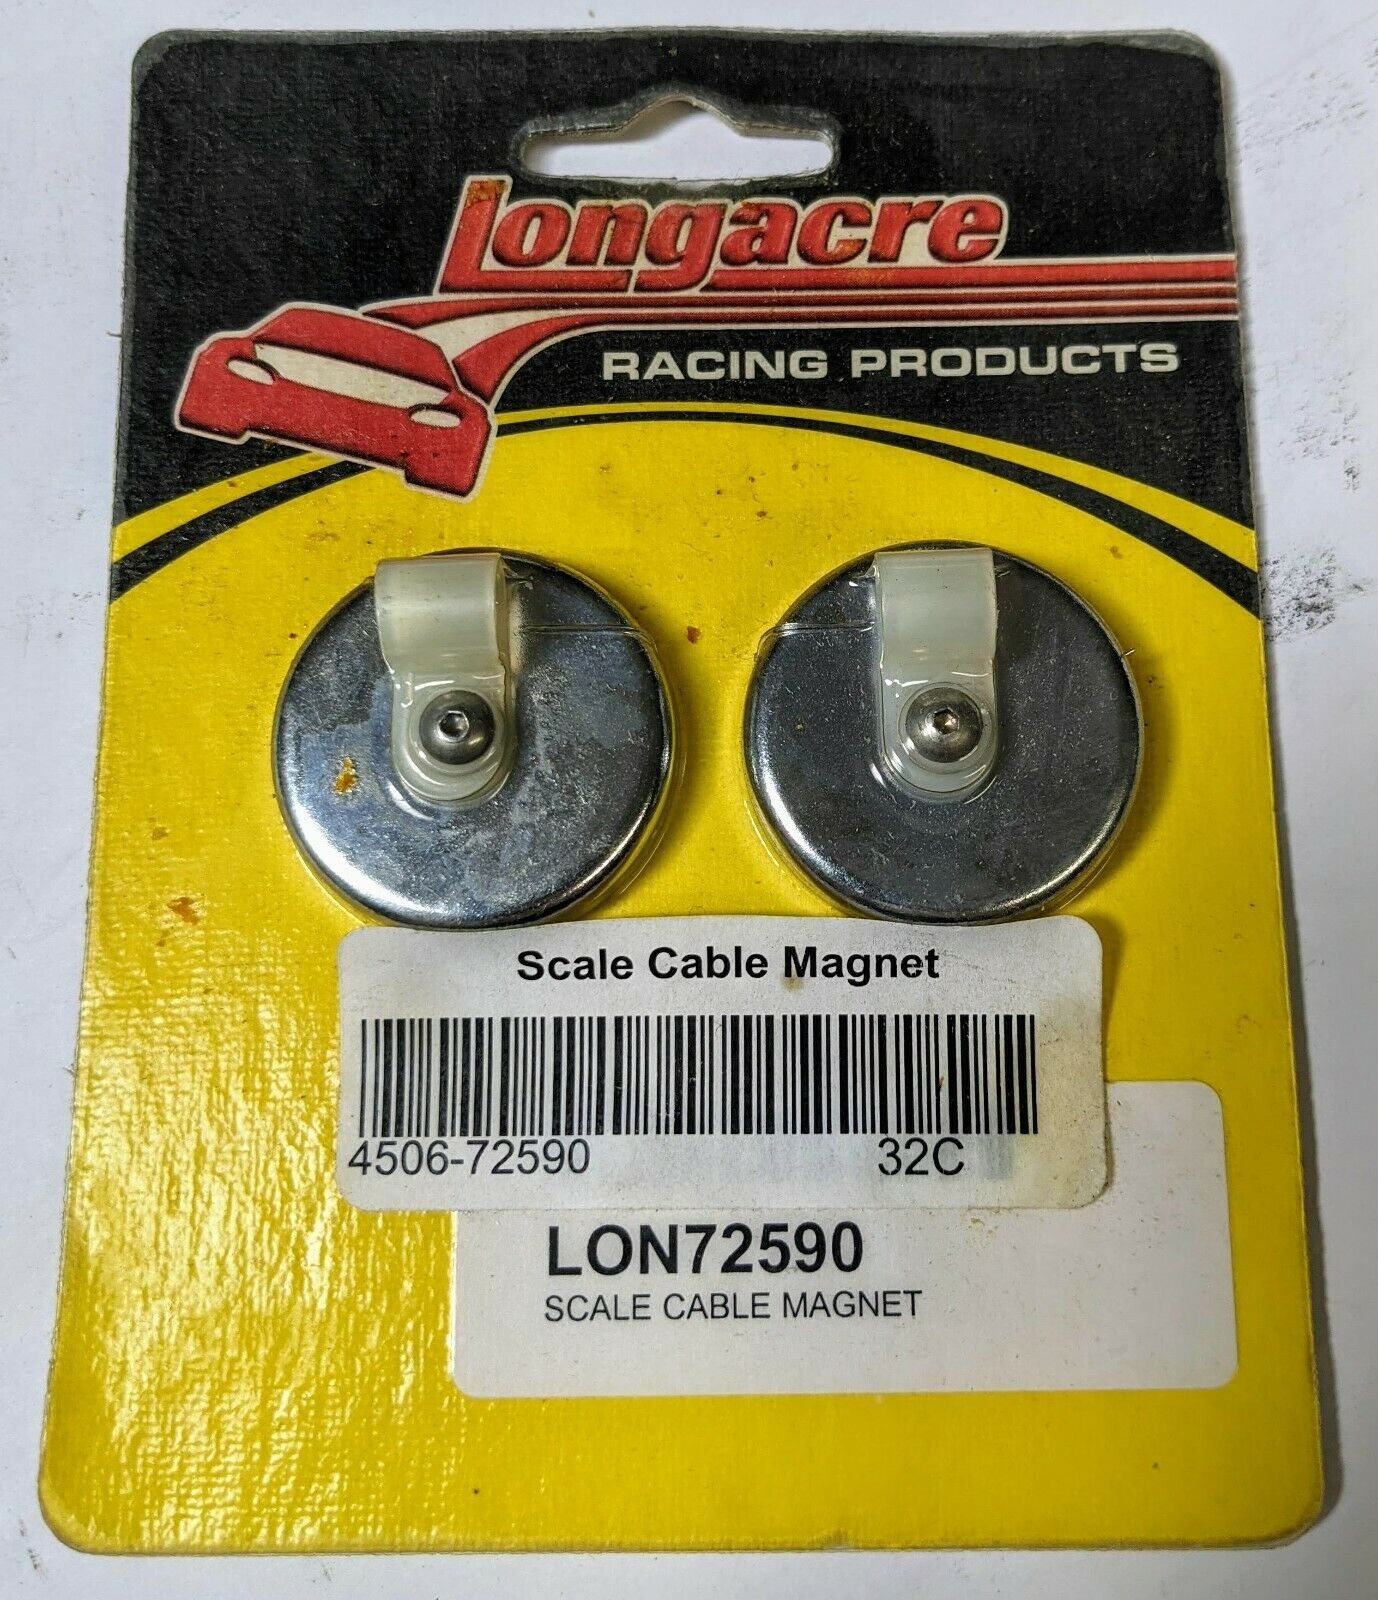 Longacre Racing Scale Cable Magnets